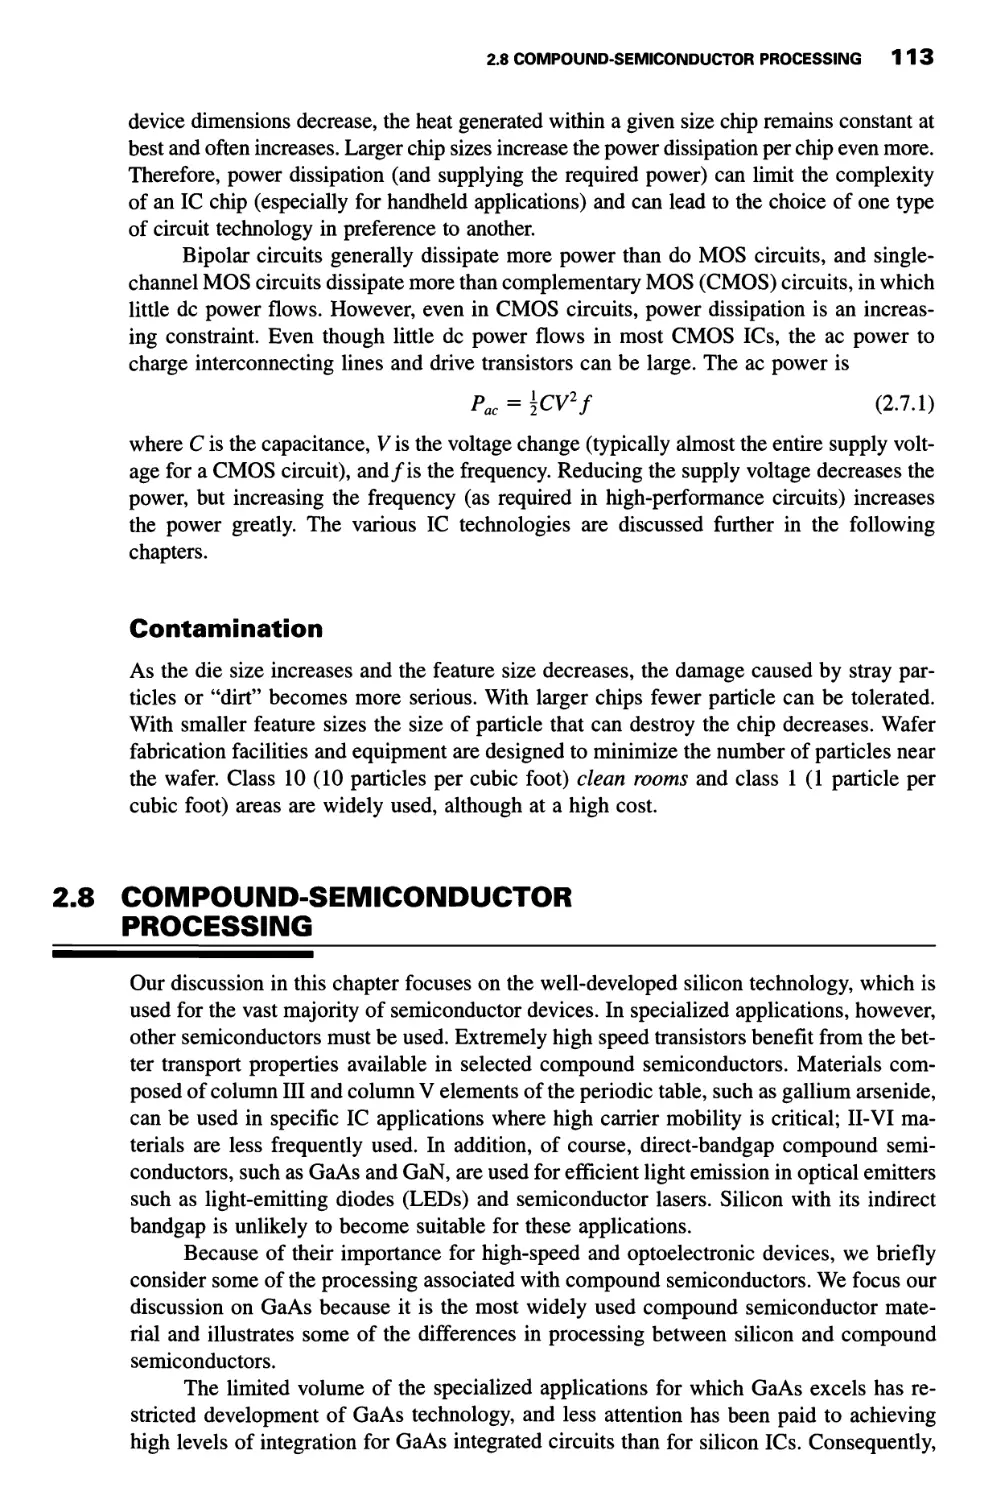 2.8 Compound-Semiconductor Processing